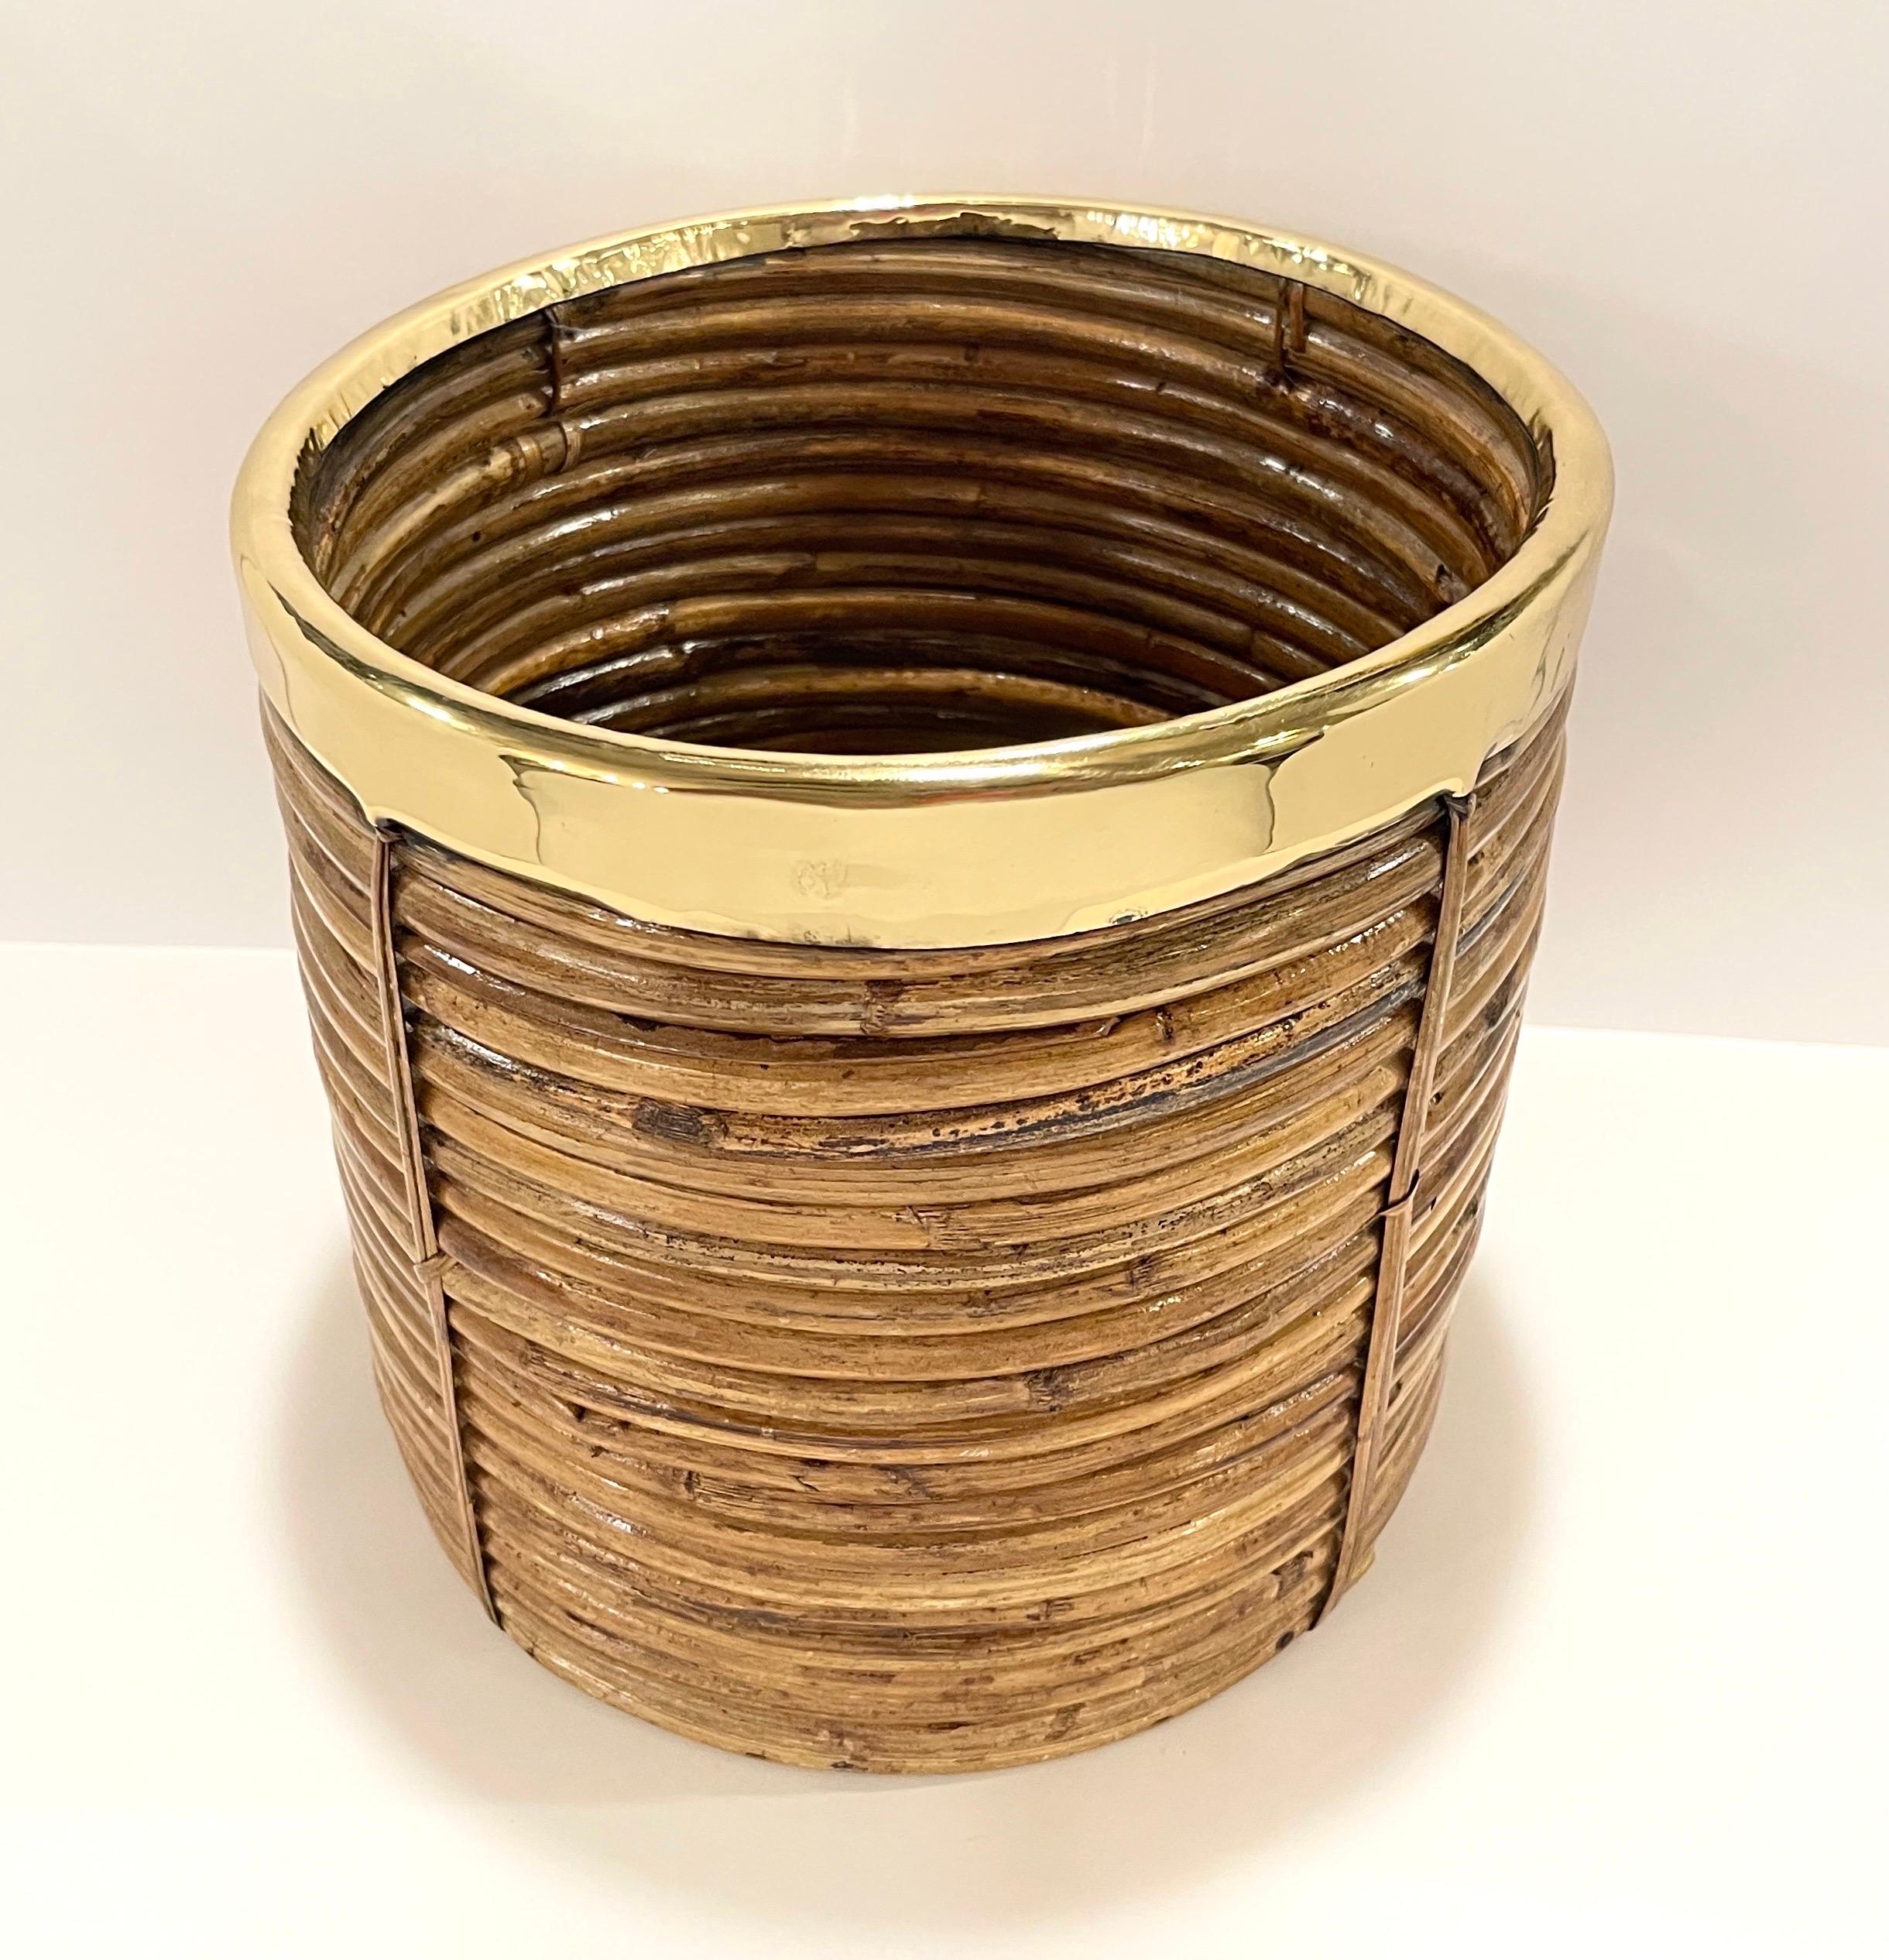 1970s Italian Bamboo/ Rattan Wastepaper Basket with Polished Brass Rim In Good Condition For Sale In West Palm Beach, FL